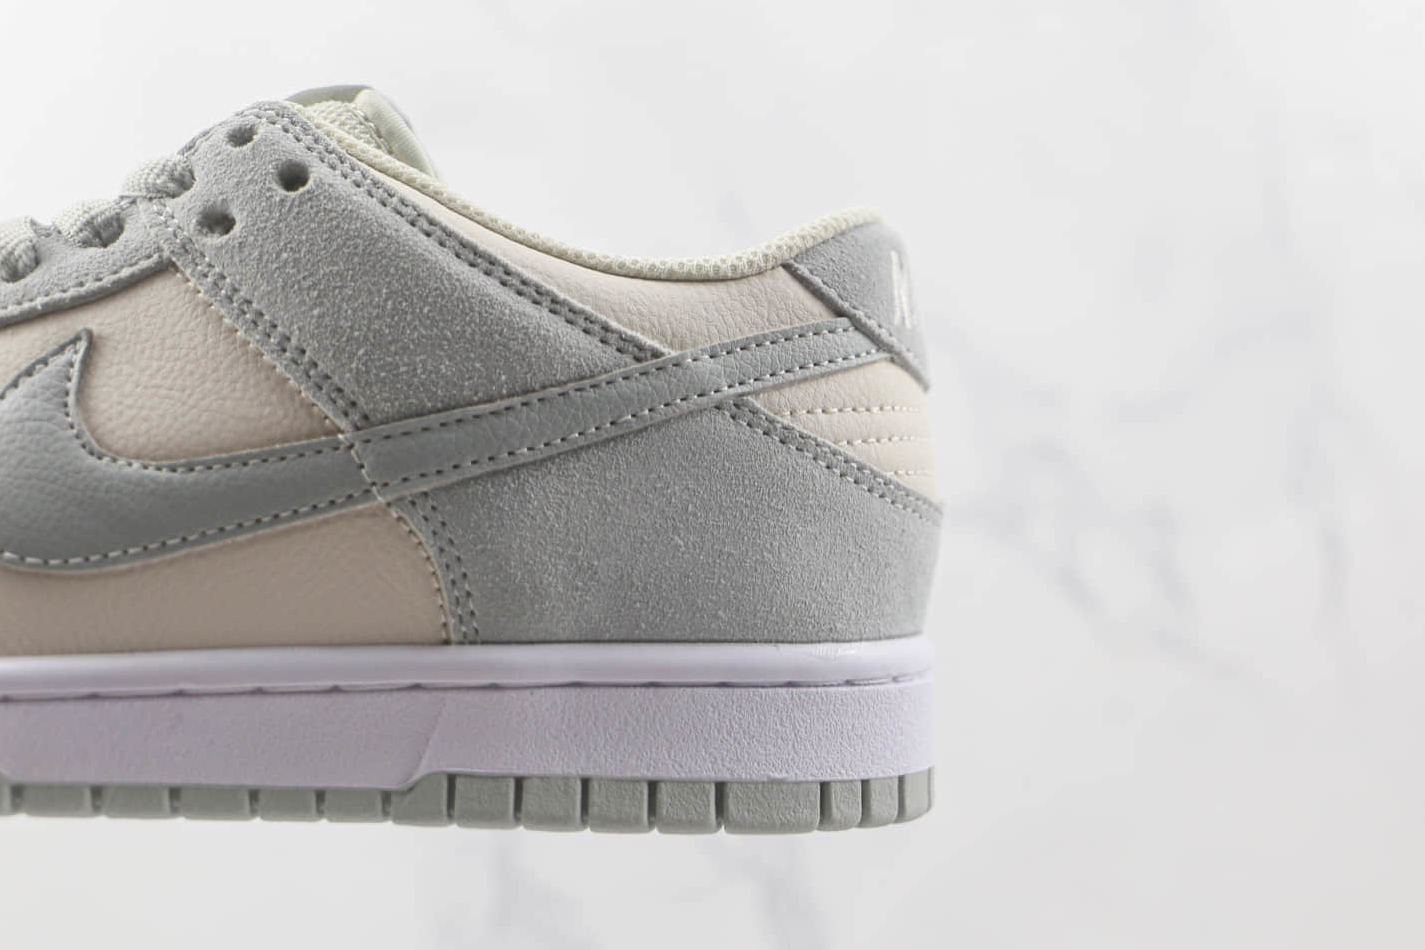 Nike SB Dunk Low PRM Light Grey White 316272-060 - Stylish and Versatile Sneakers for Every Occasion